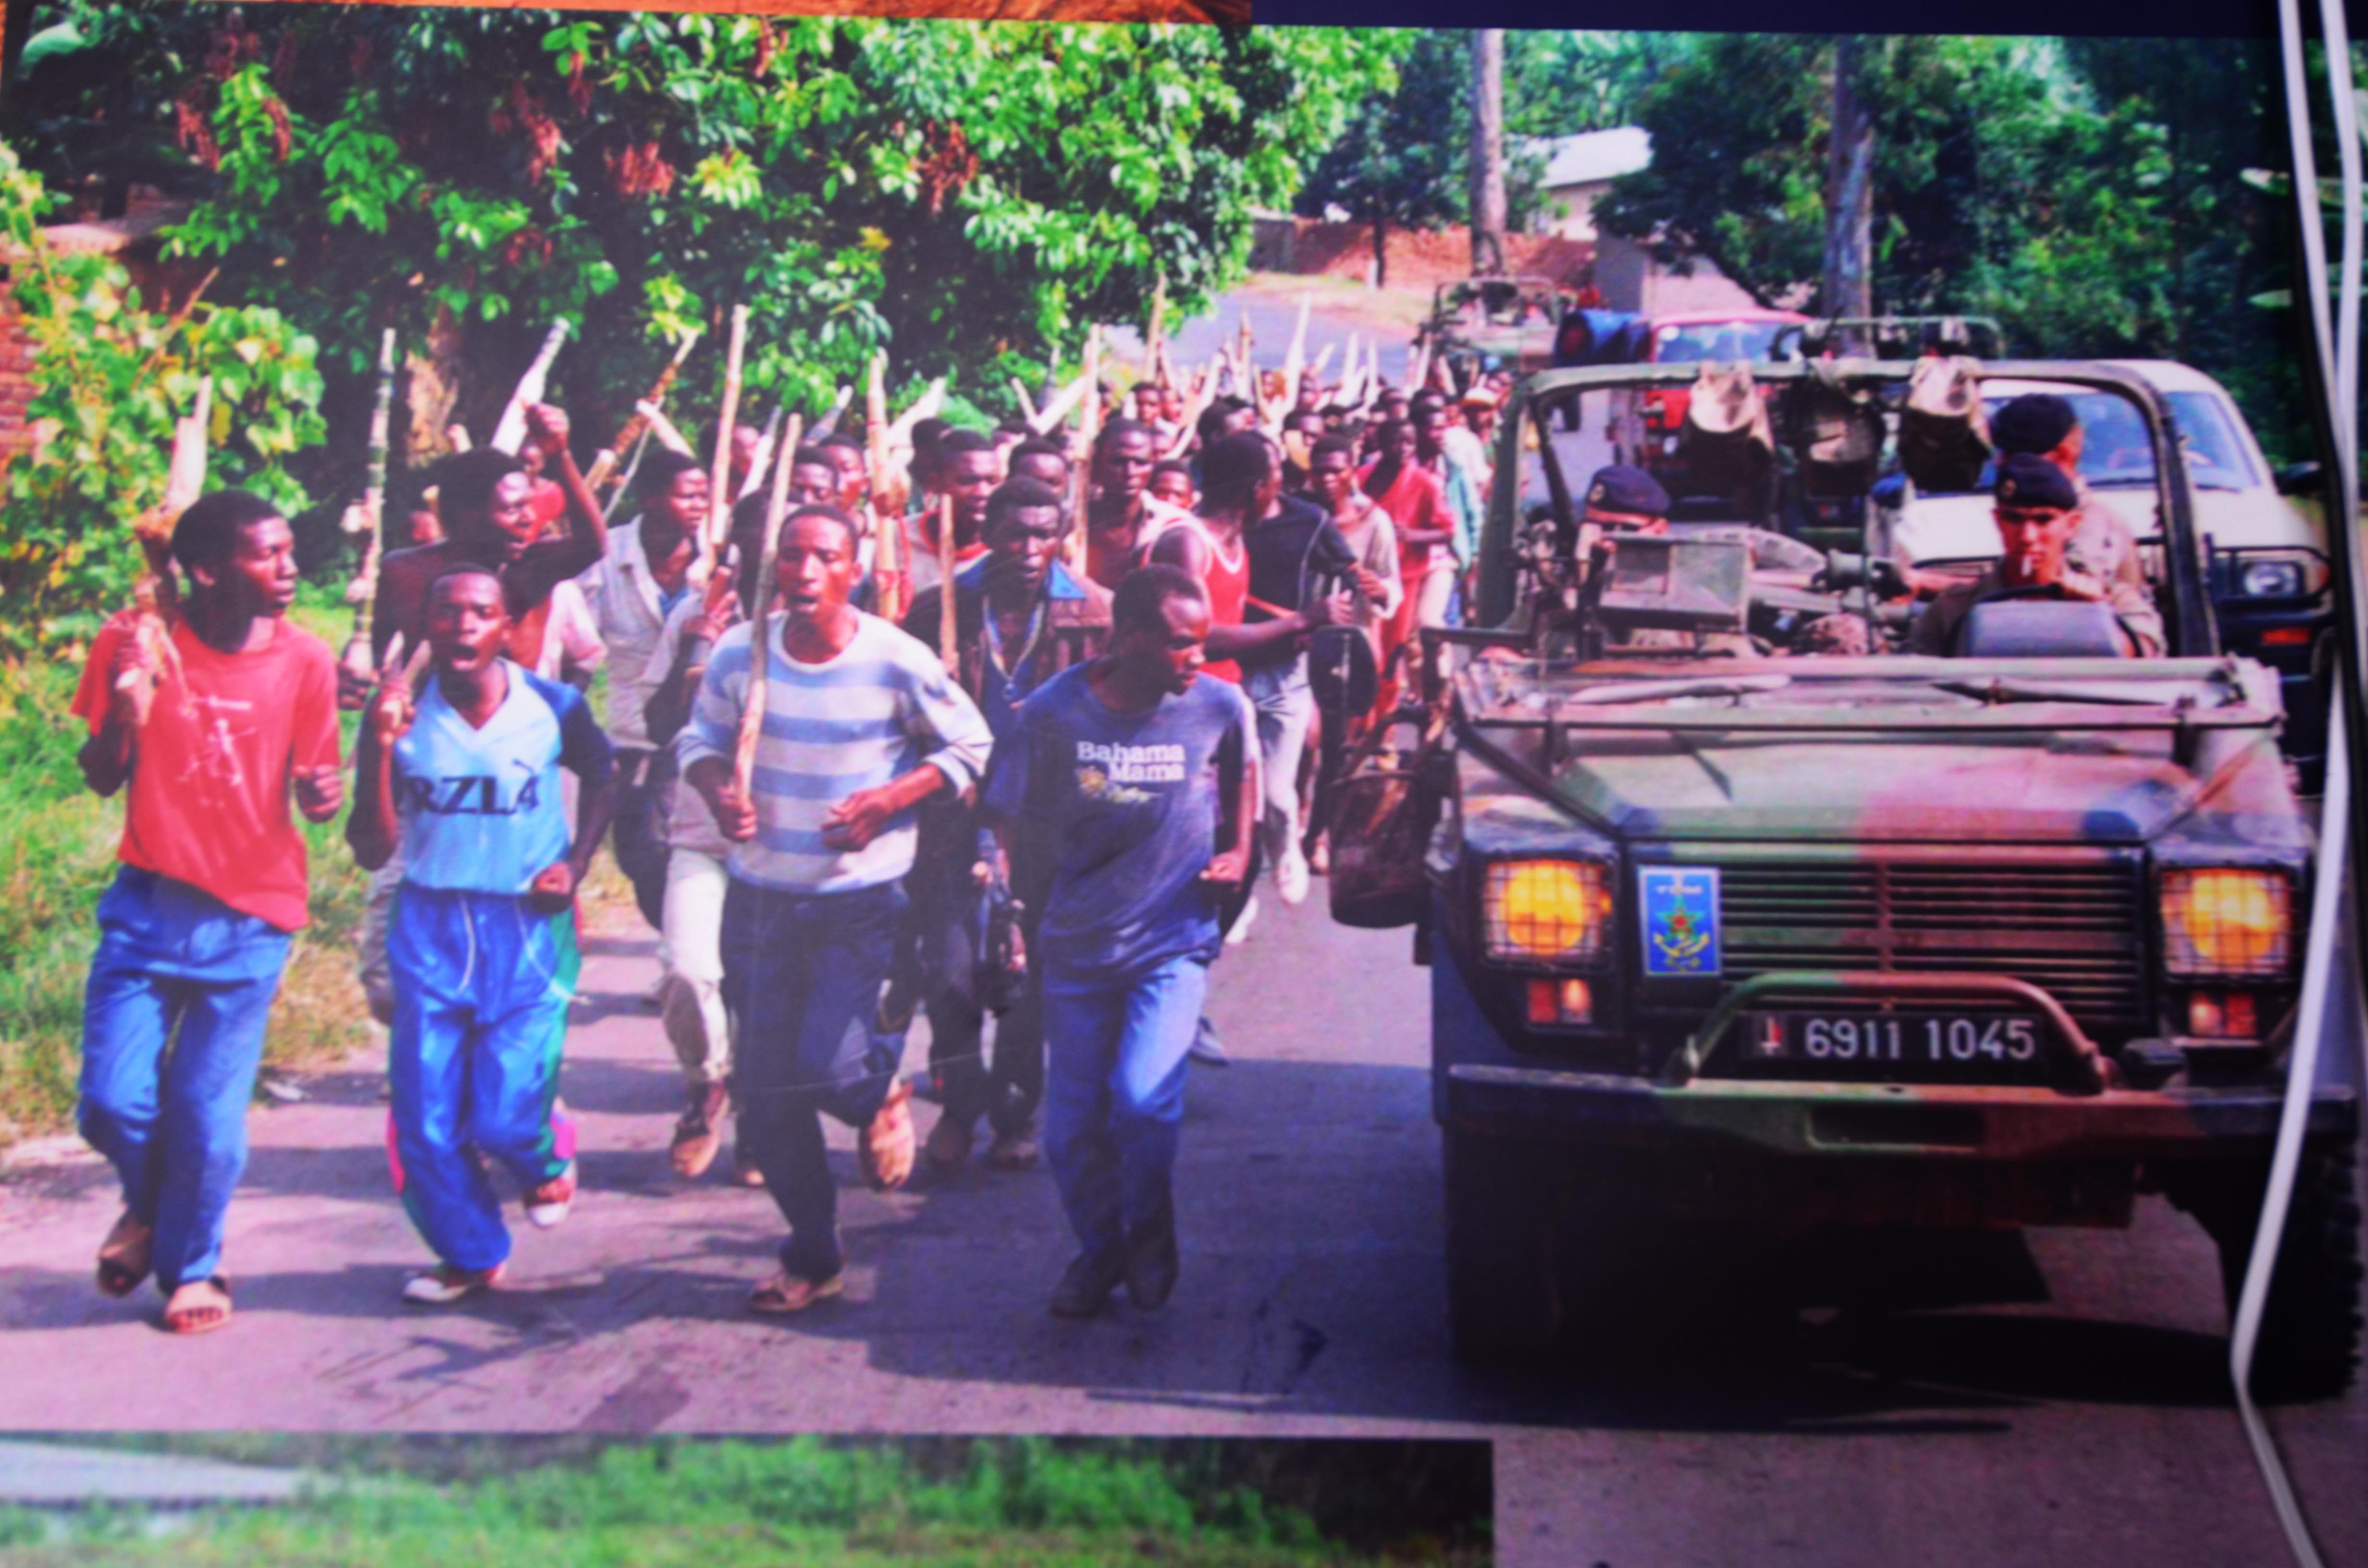 Members of the Interahamwe militia run alongside trucks carrying French troops in this picture that is part of the documentation at Murambi Genocide Memorial in Nyamagabe District. / Photo: File.